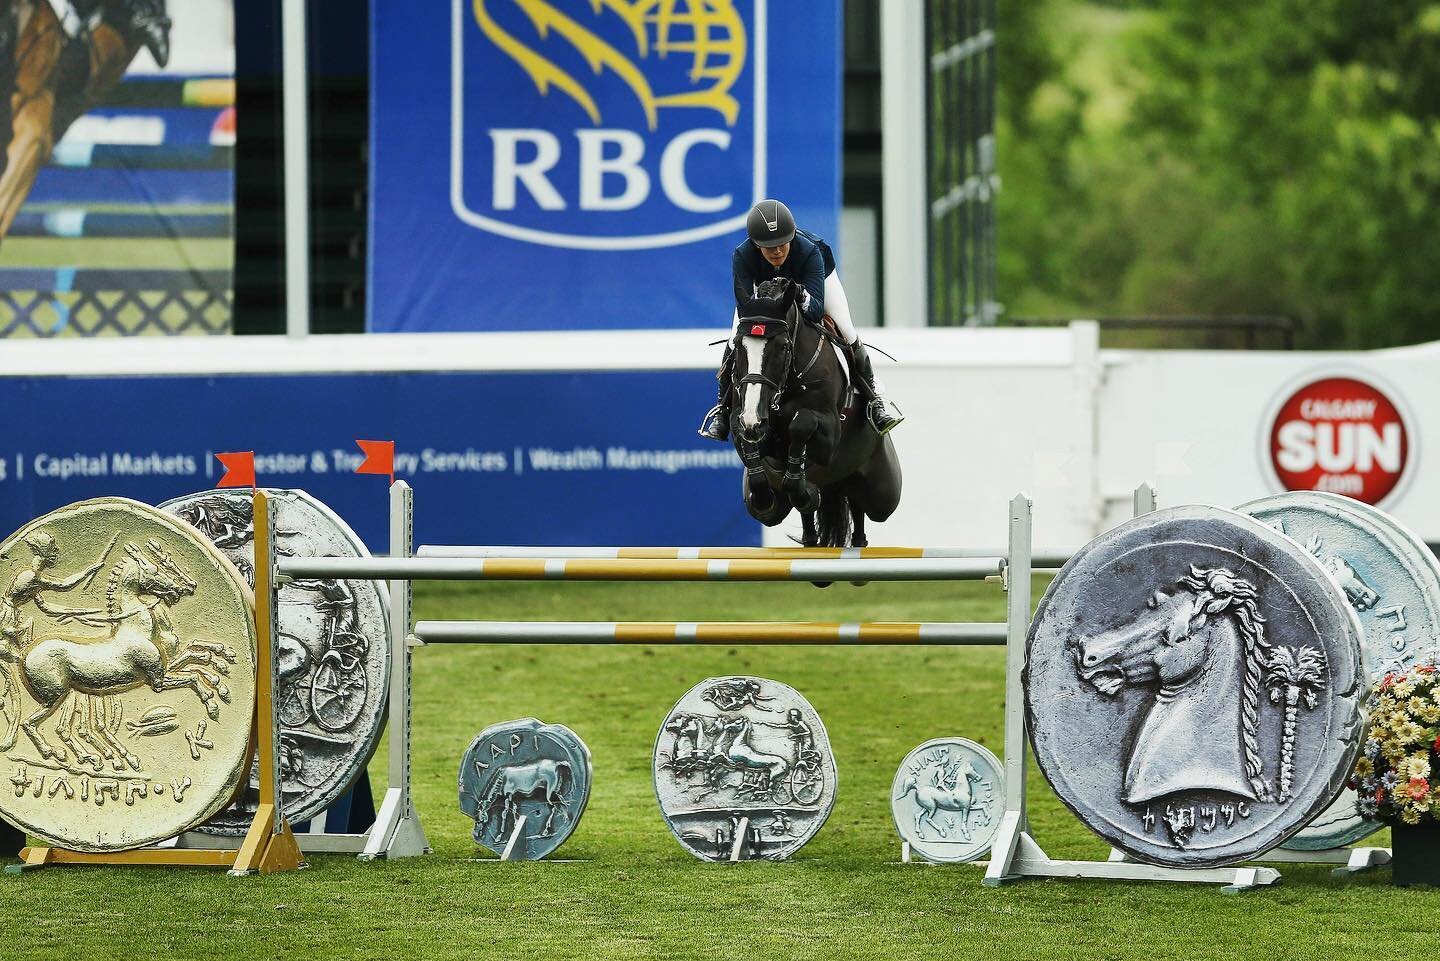 #tbt in honour of what would have been the first day of Spruce Meadows Summer Series... #staymotivated 
#samshield #butet #respondsystems